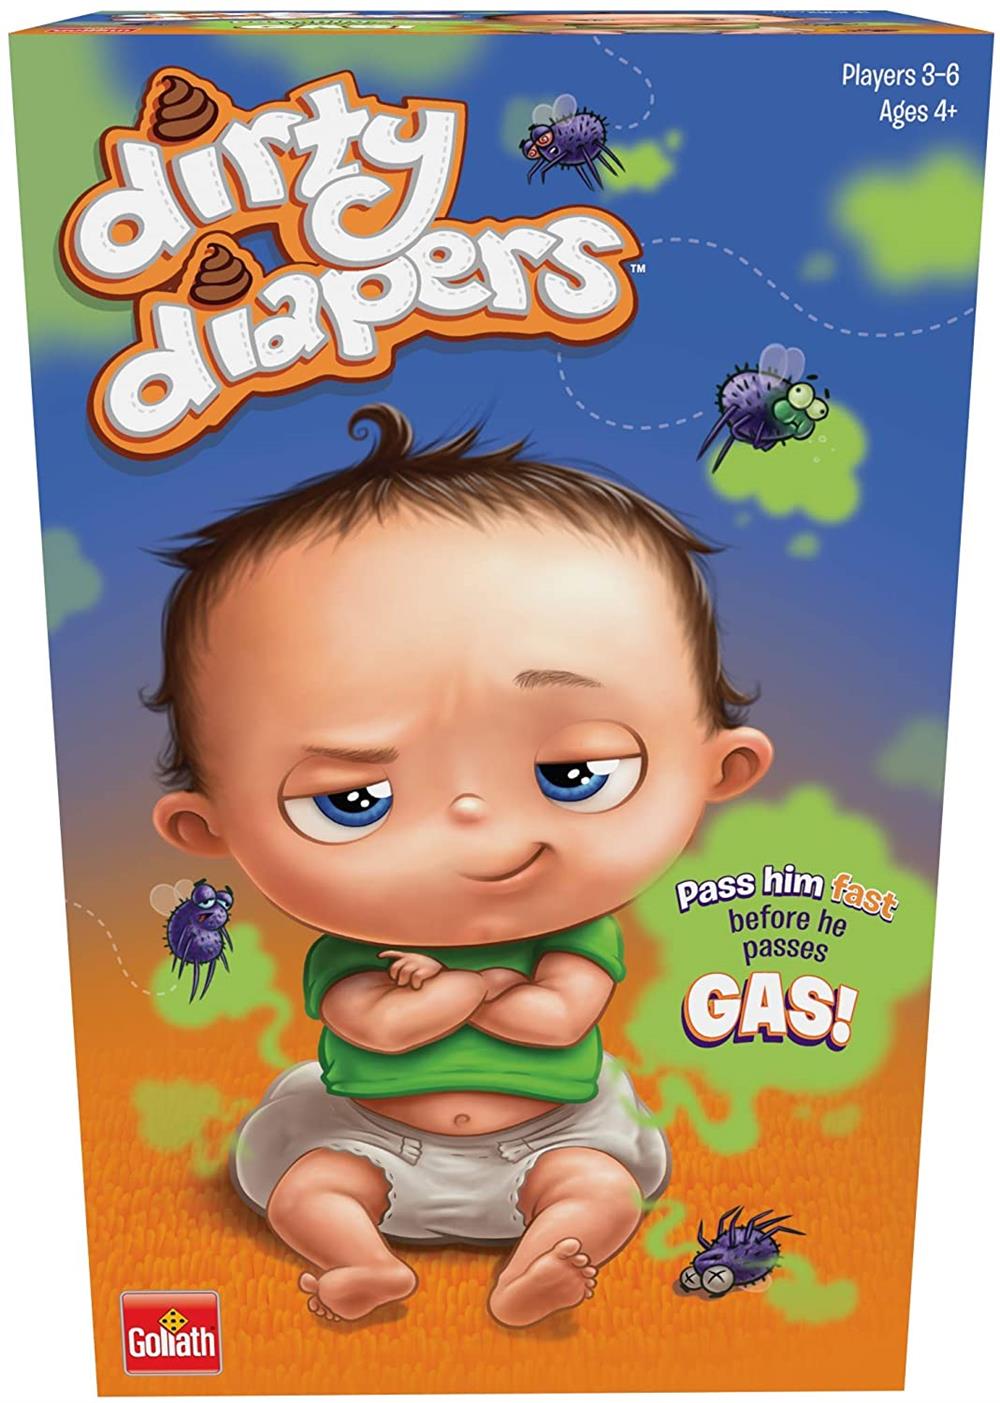 Goliath Dirty Diapers - Pass Tootin’ Tom Fast Before He Passes Gas!